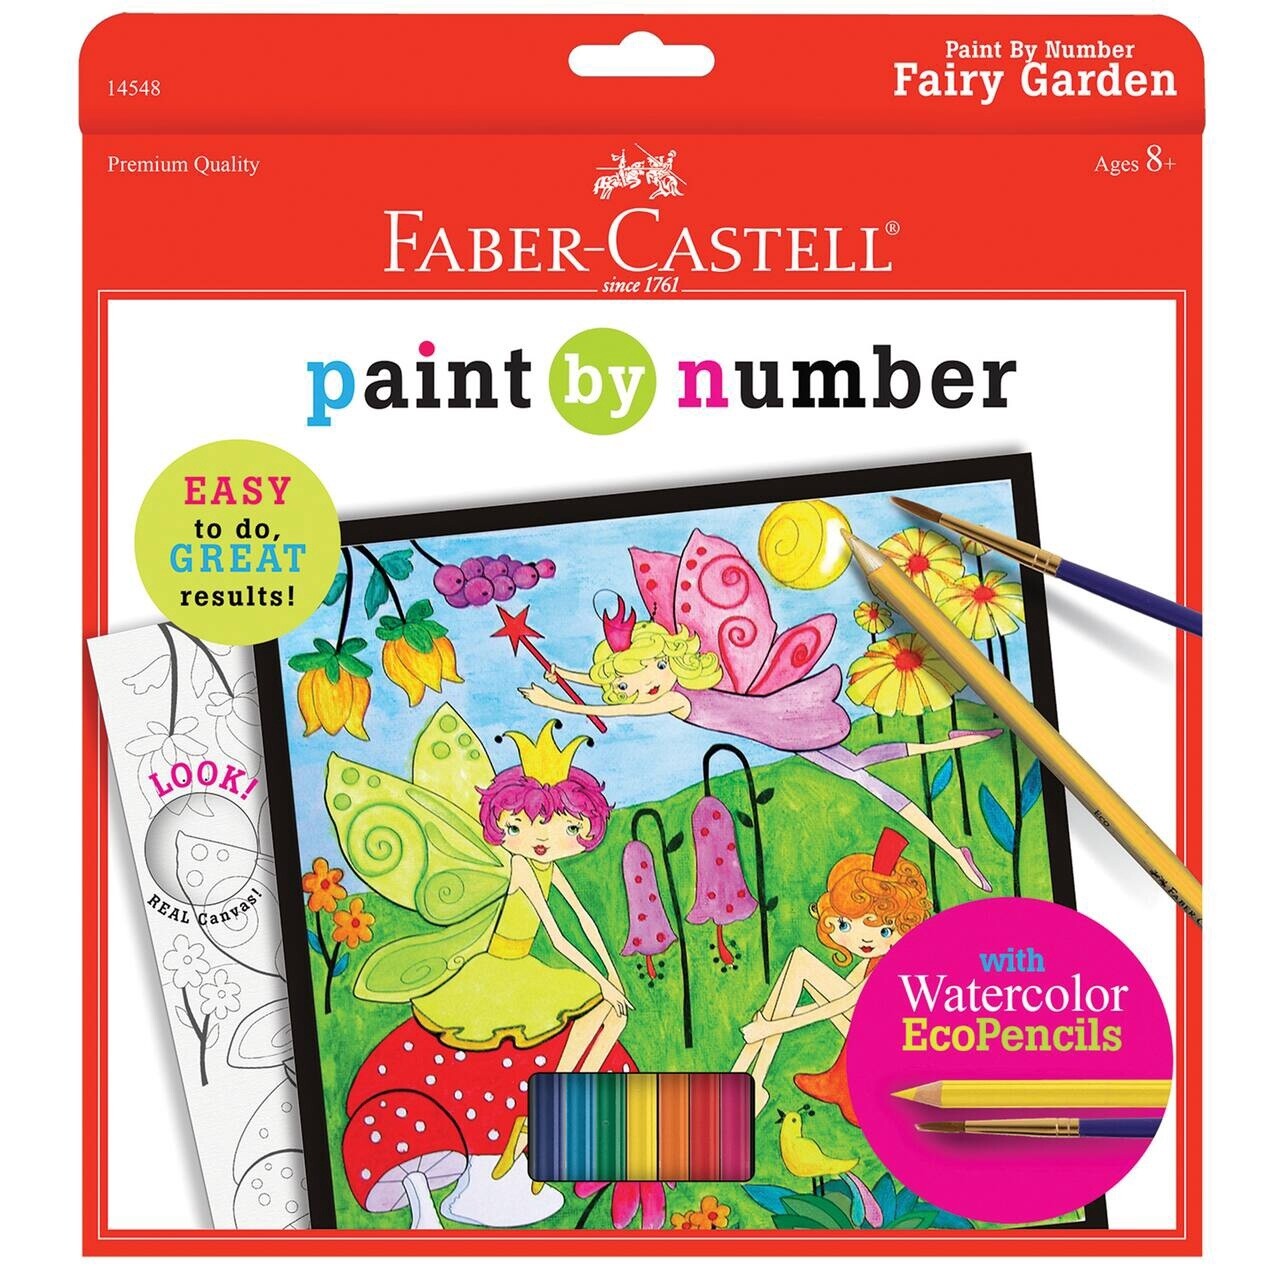 Faber-Castell Paint By Number Fairy Garden